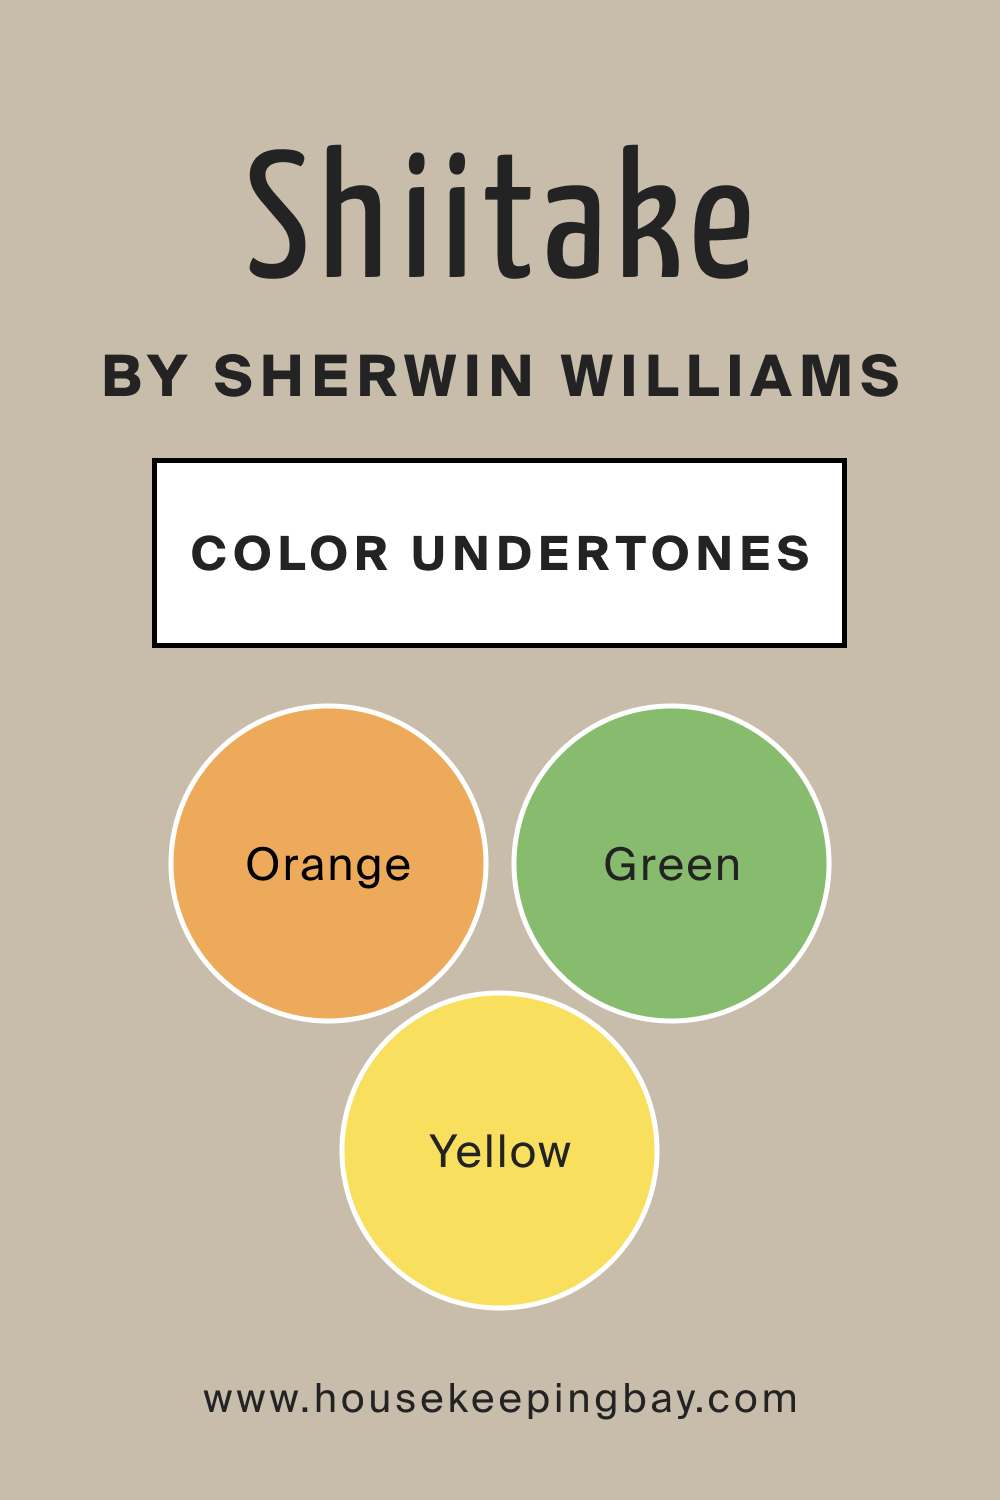 What Undertones Does SW Shiitake Color Have